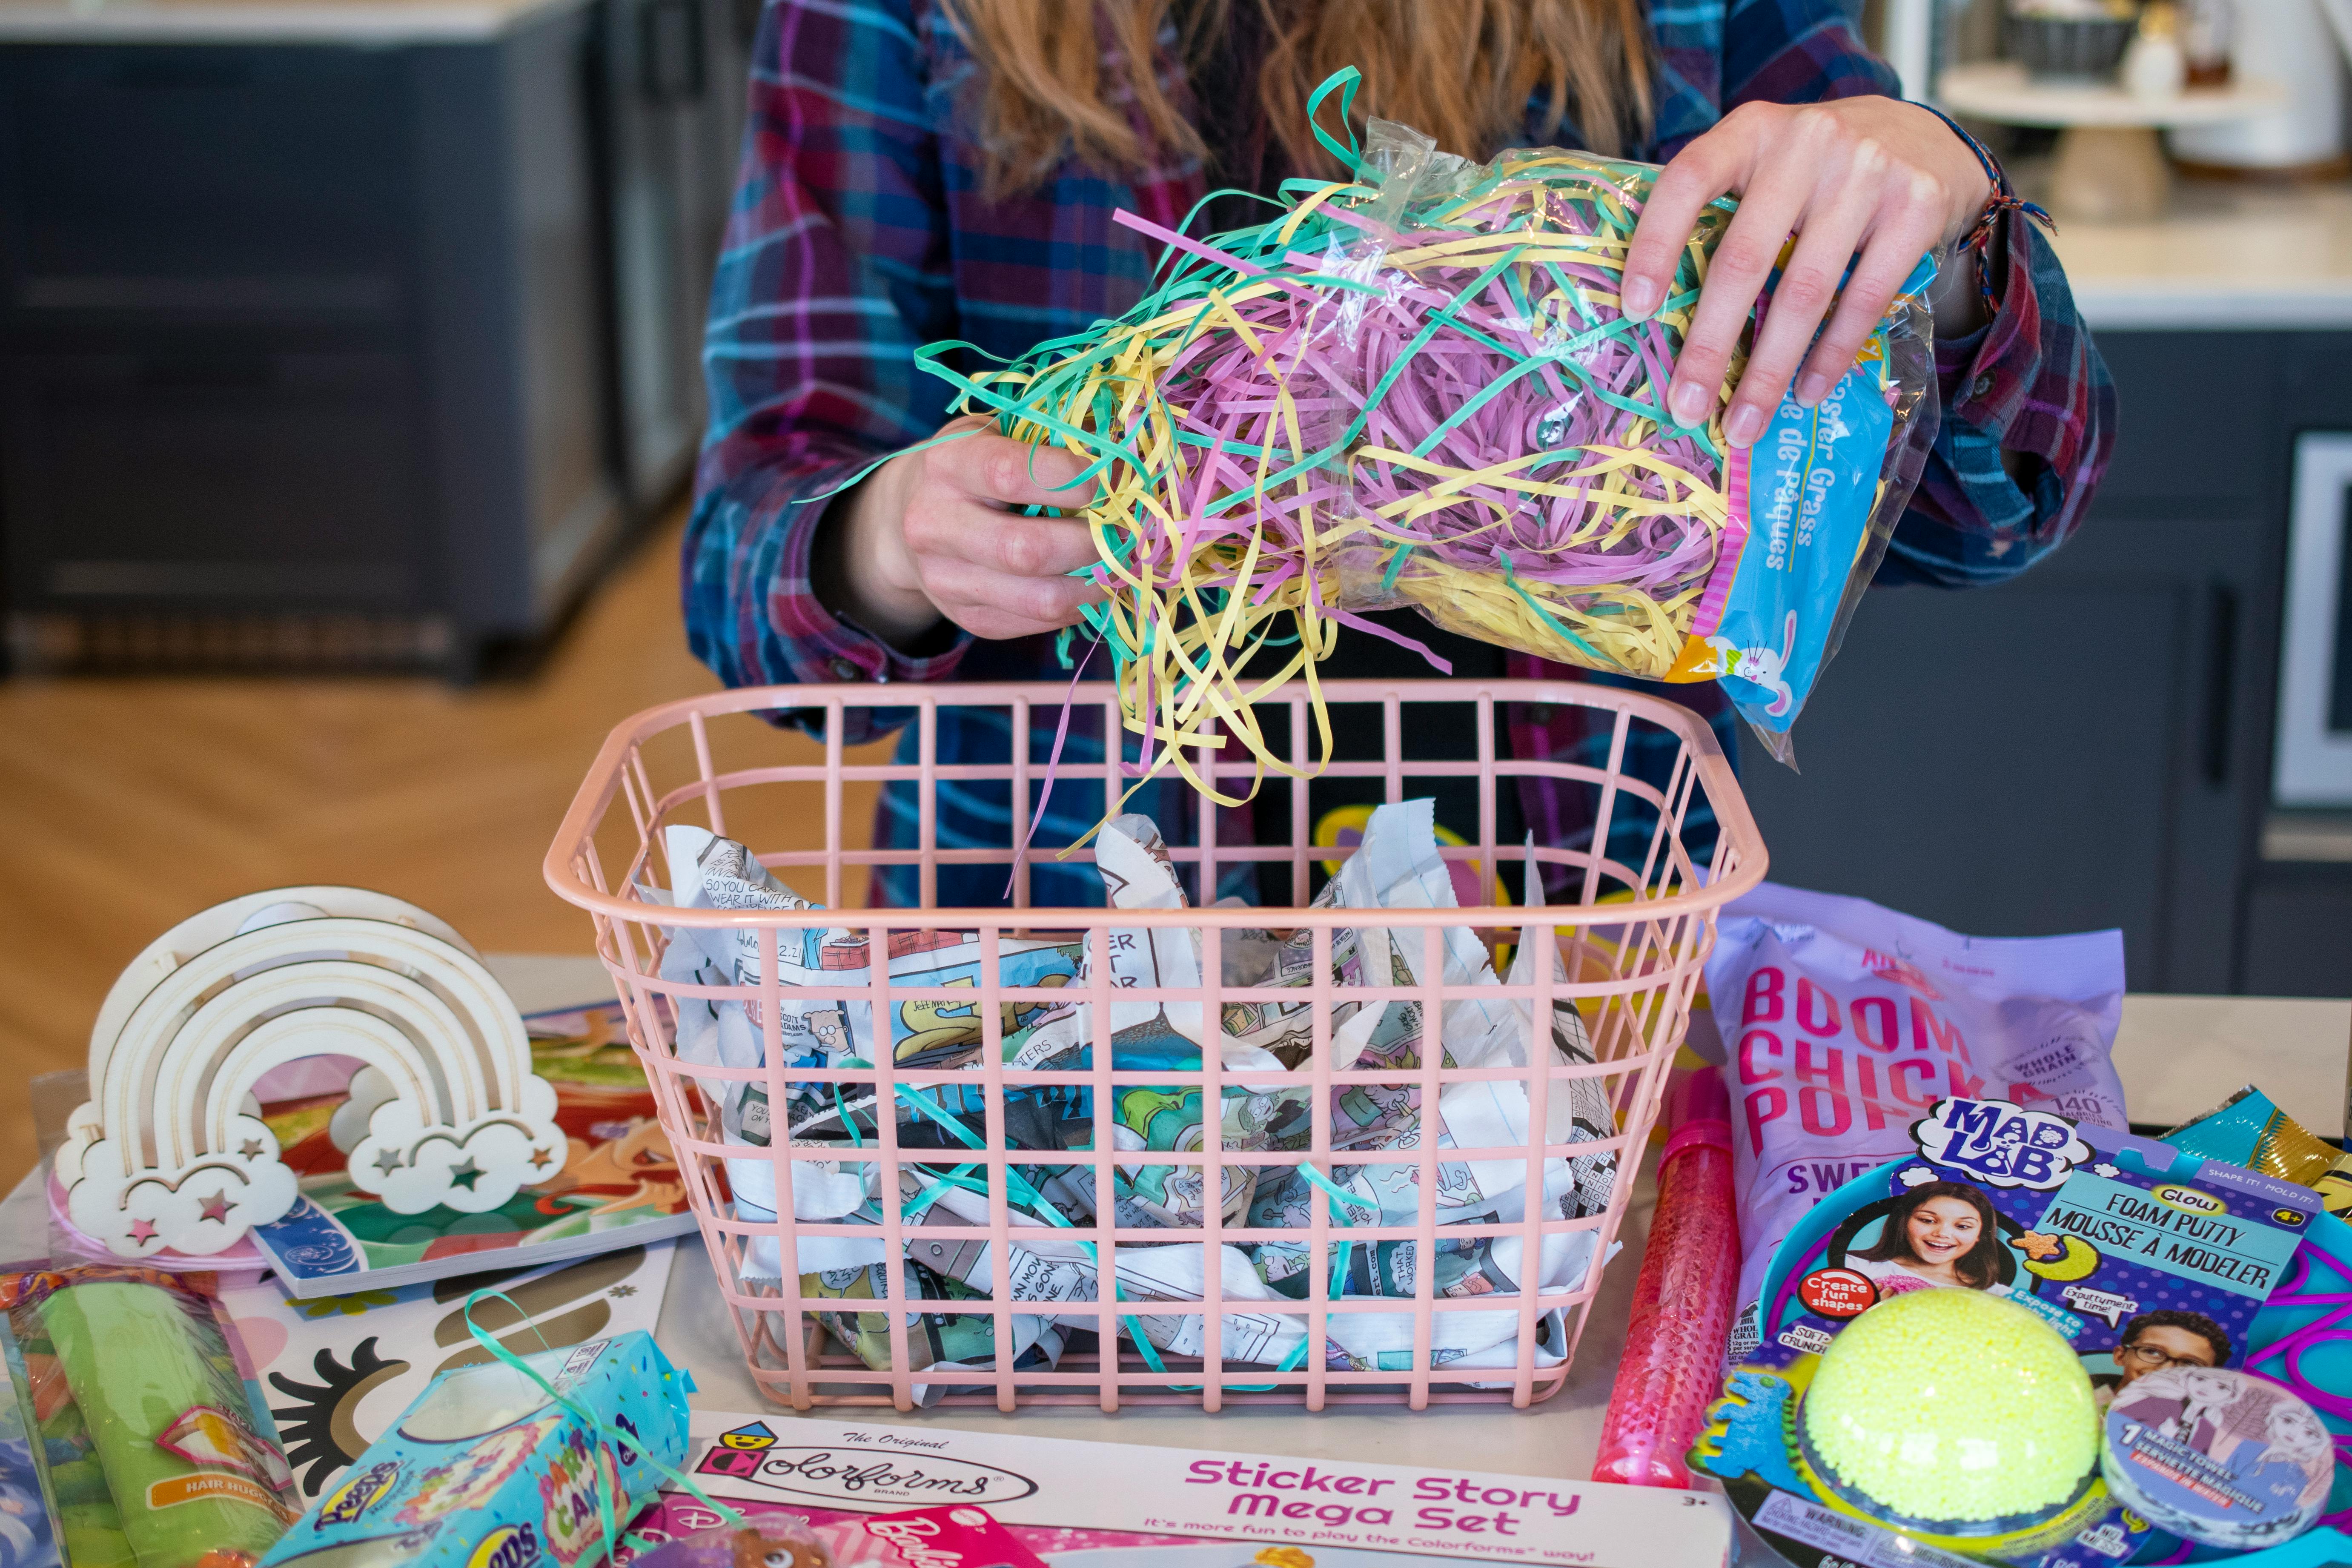 Toys and items are on the counter surrounding a pink basket. Newspaper is crumpled up inside of the basket and a person is pulling Easter grass from the packaging to put inside the basket.